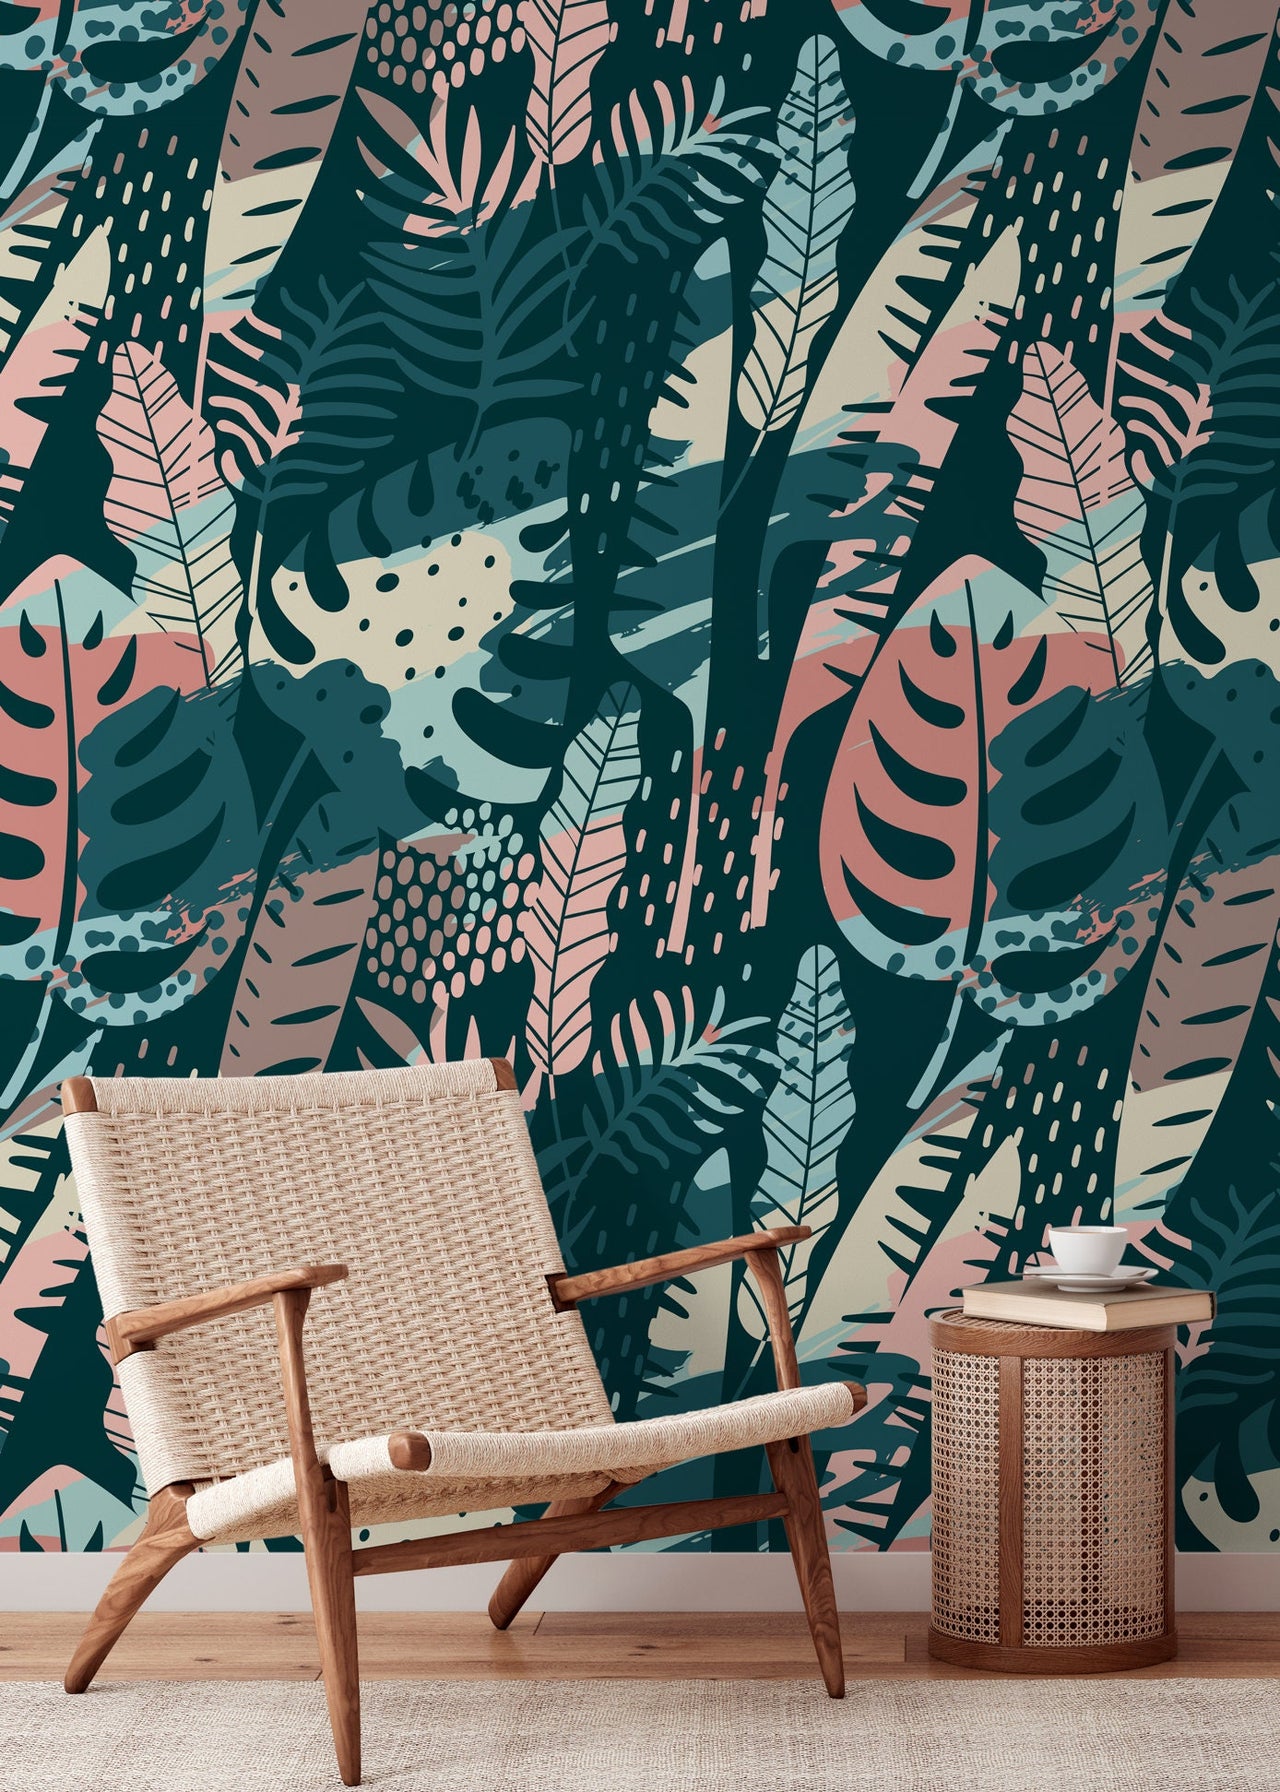 Wallpaper Peel and Stick Wallpaper Removable Wallpaper Home Decor Wall Decor Room Decor / Tropical Abstract Monstera Leaf Wallpaper - A832